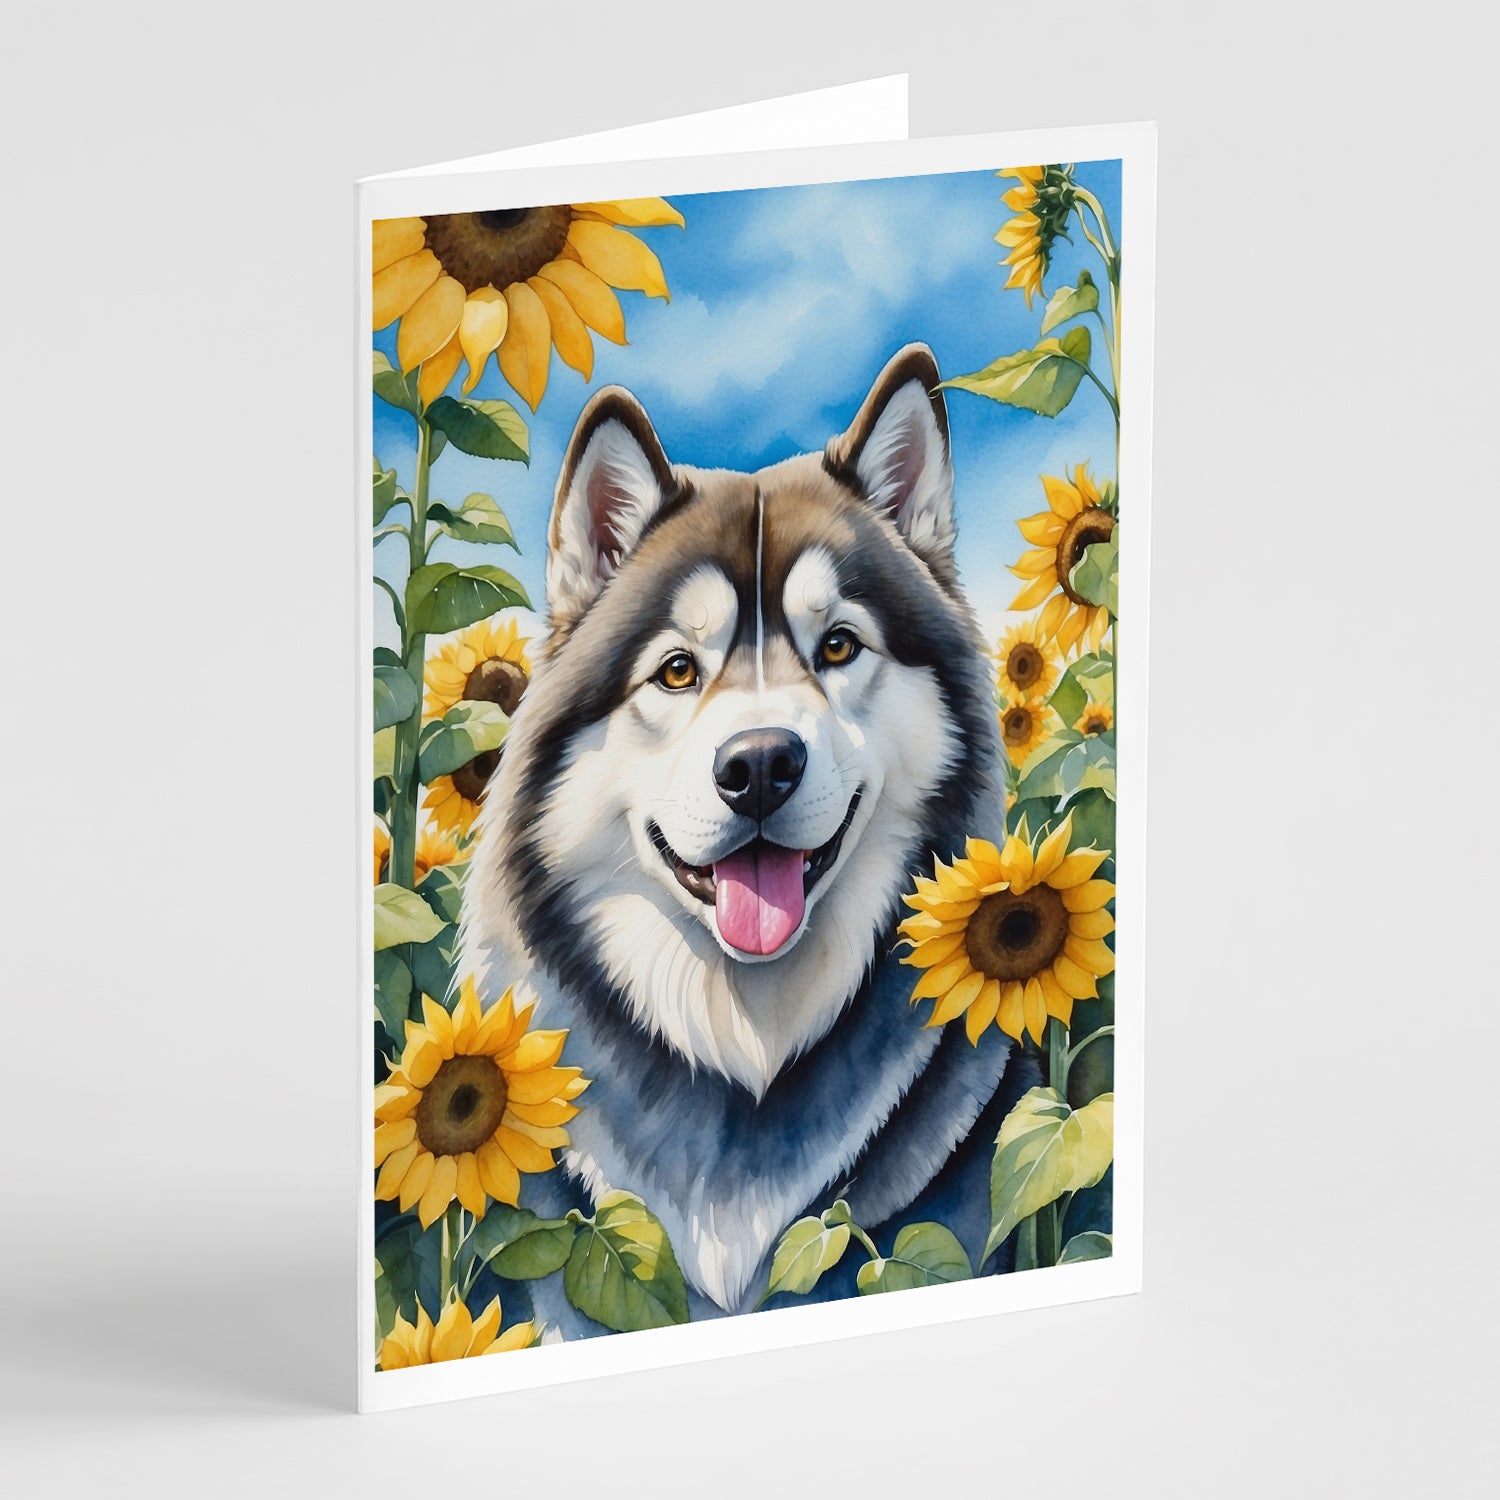 Buy this Alaskan Malamute in Sunflowers Greeting Cards Pack of 8